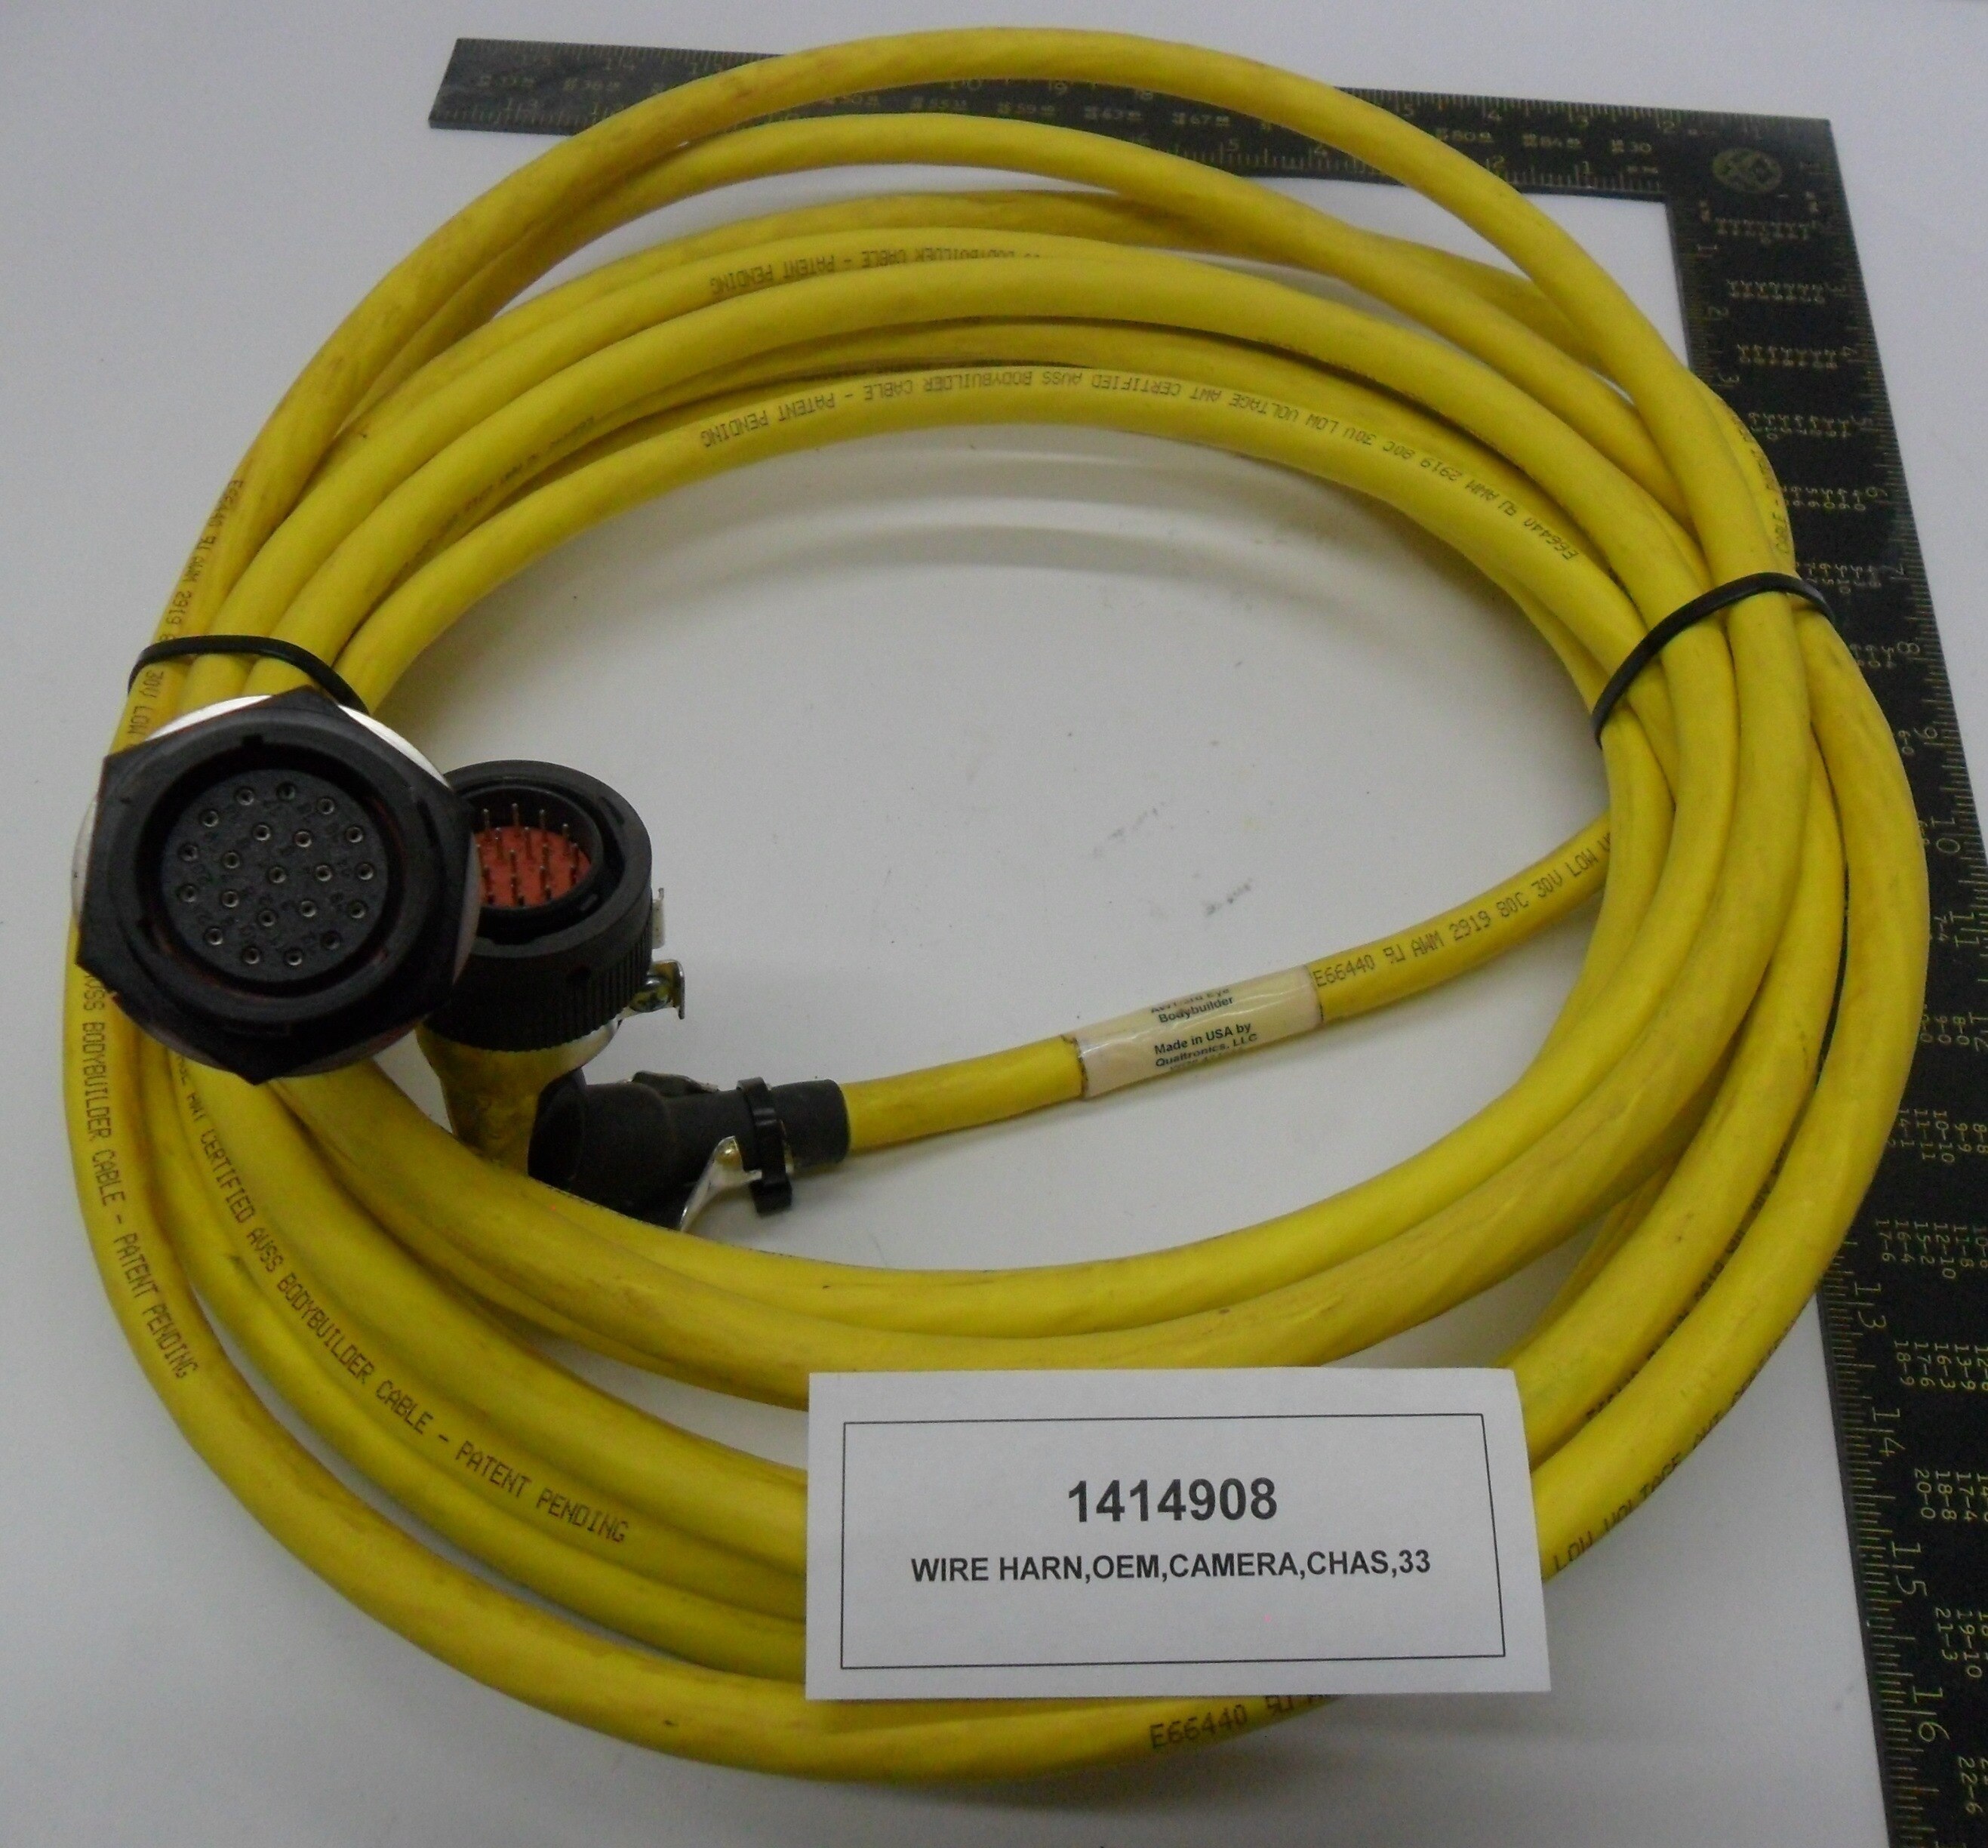 WIRE HARN,OEM,CAMERA,CHAS,33